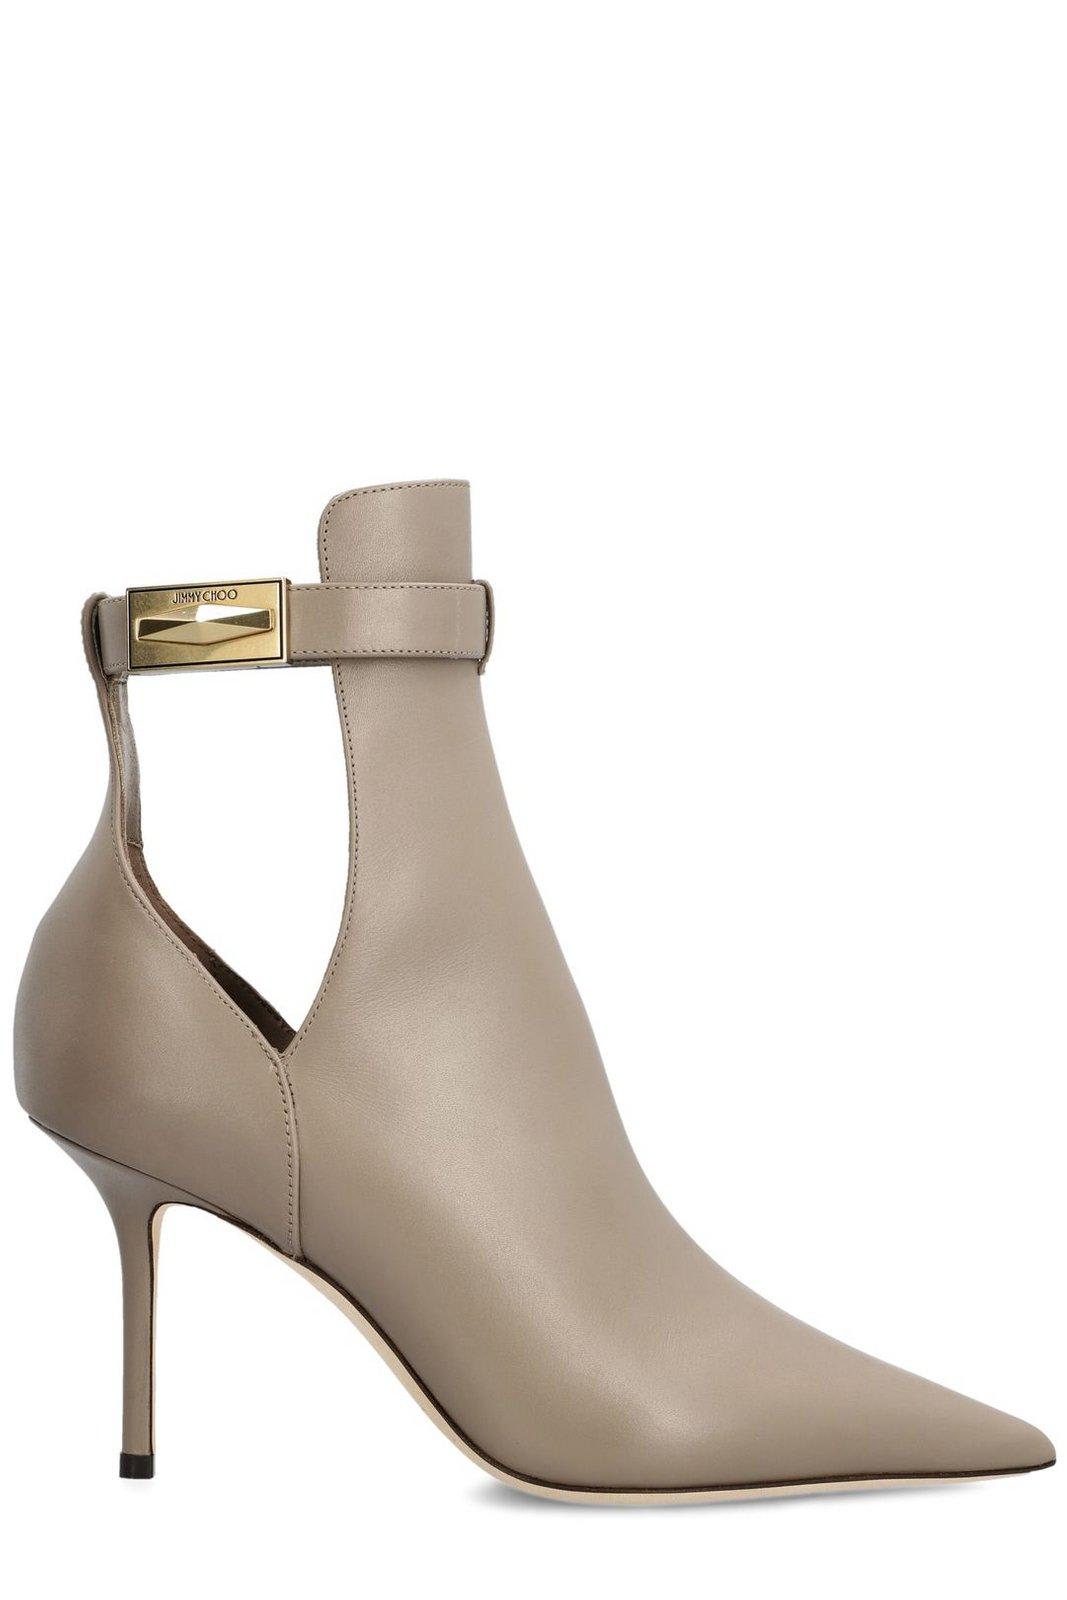 Nell 85 Cut-out Pointed-toe Ankle Boots